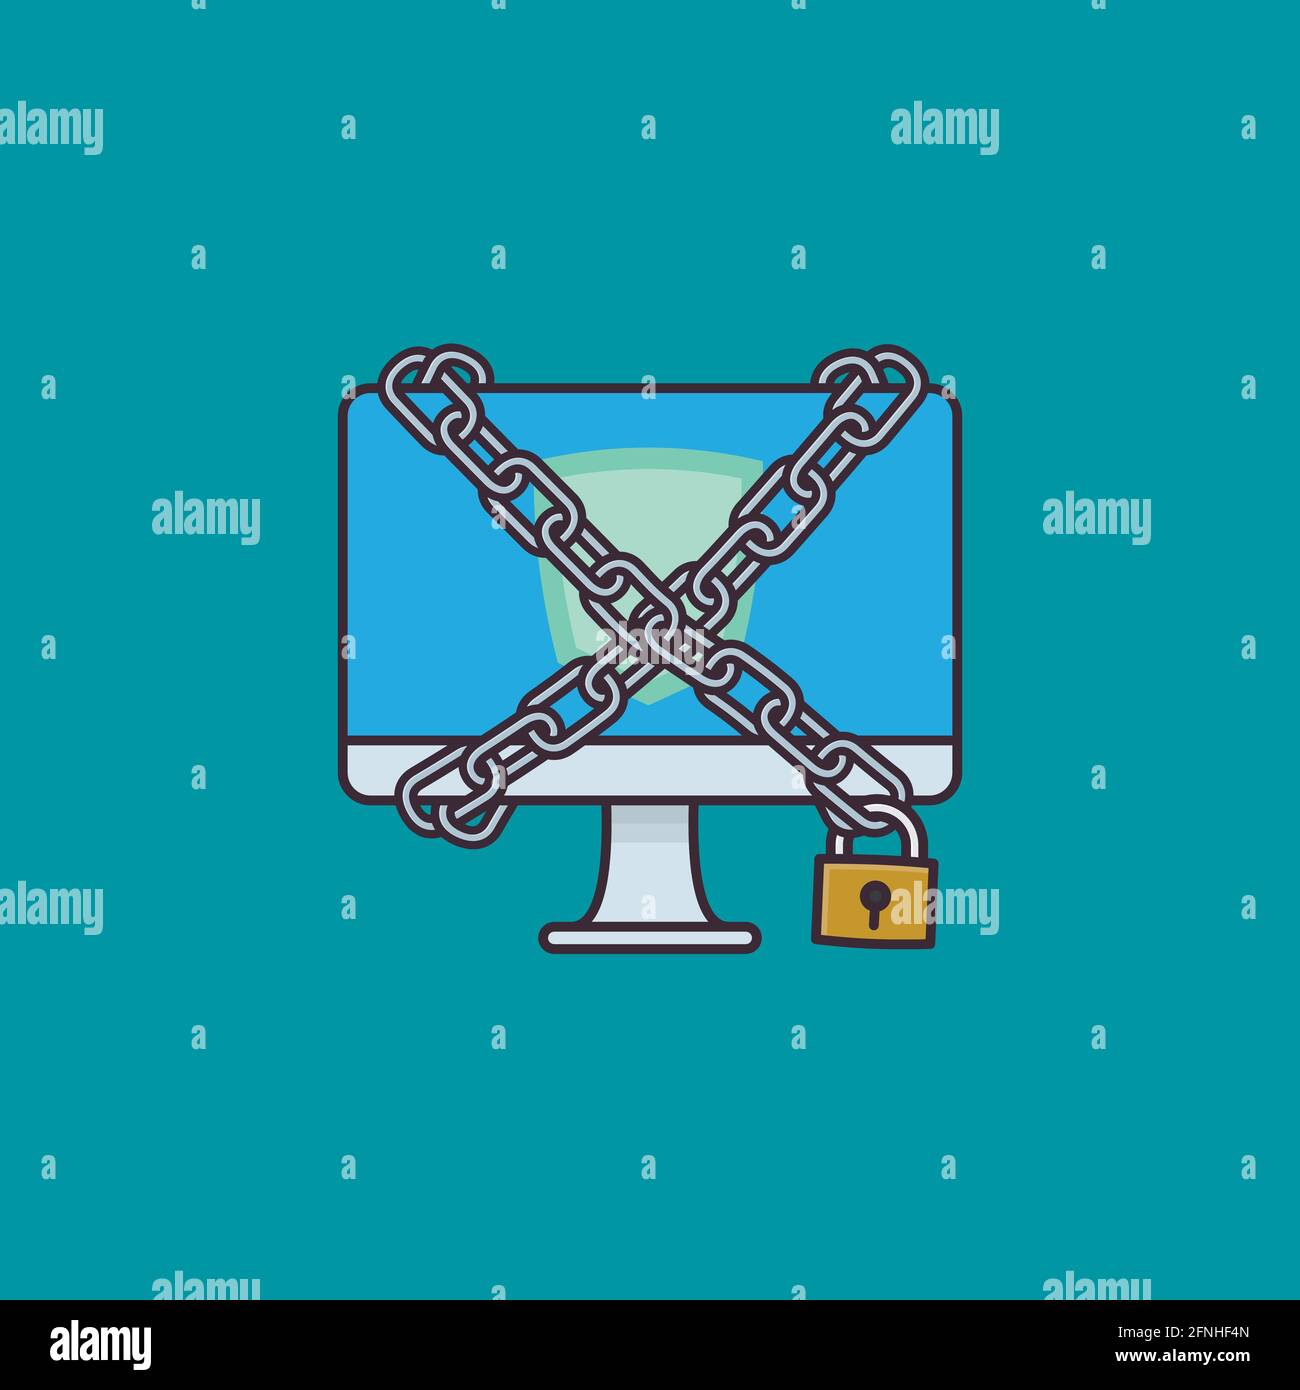 Whole and Broken Chain and Lock Set. Vector By Mouse design store